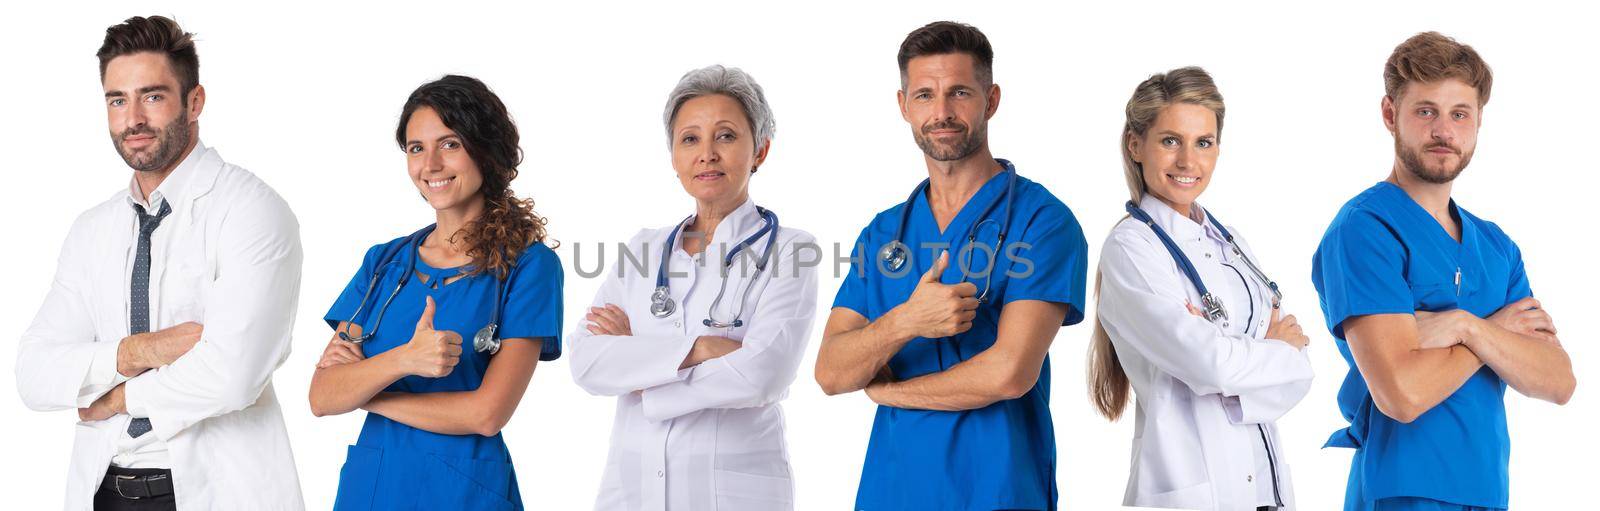 Successful group of doctors standing with arms crossed or giving thumbs up in a row isolated on white background